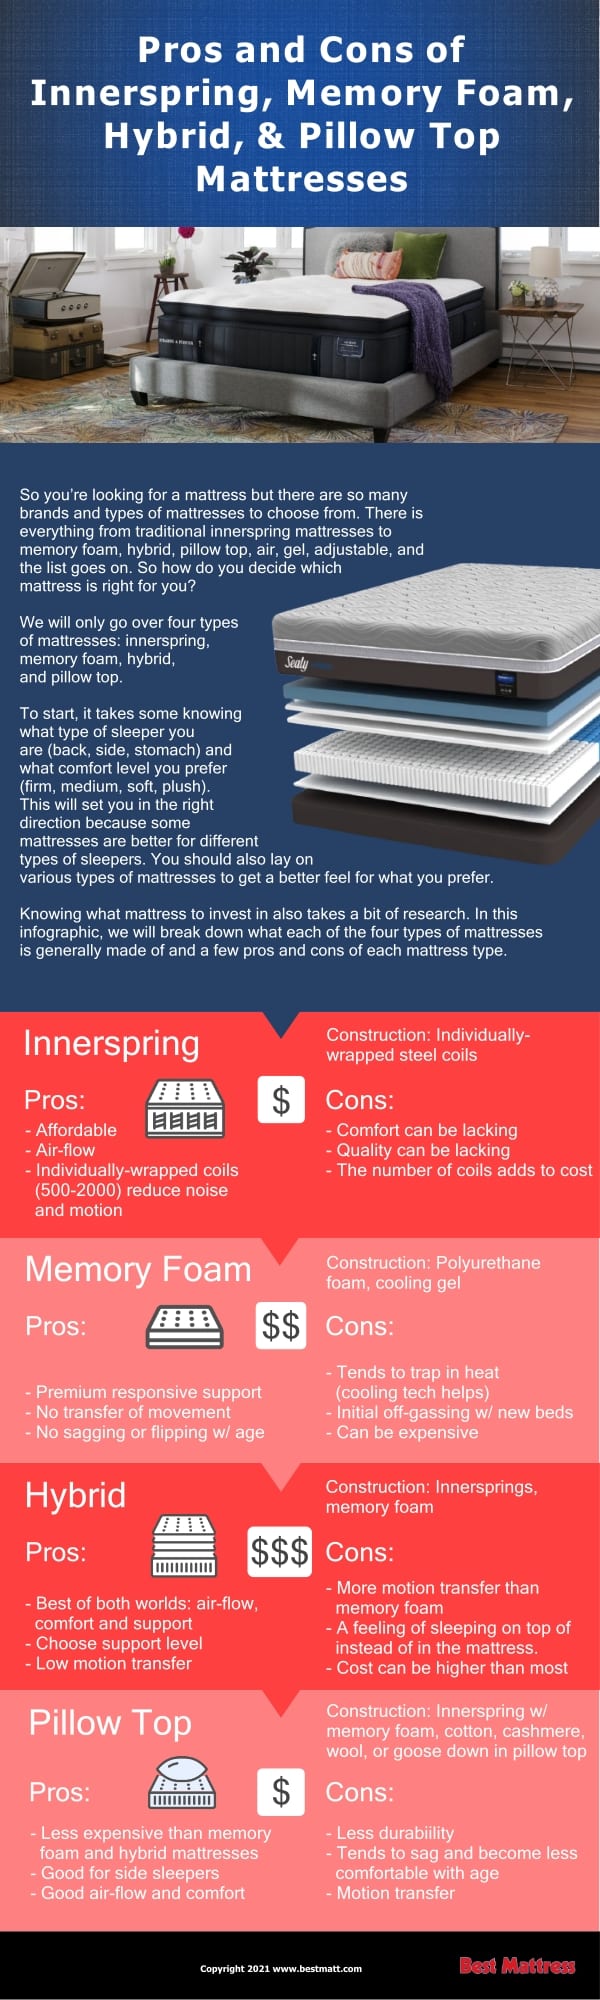 Pros And Cons Of Sealy Mattresses